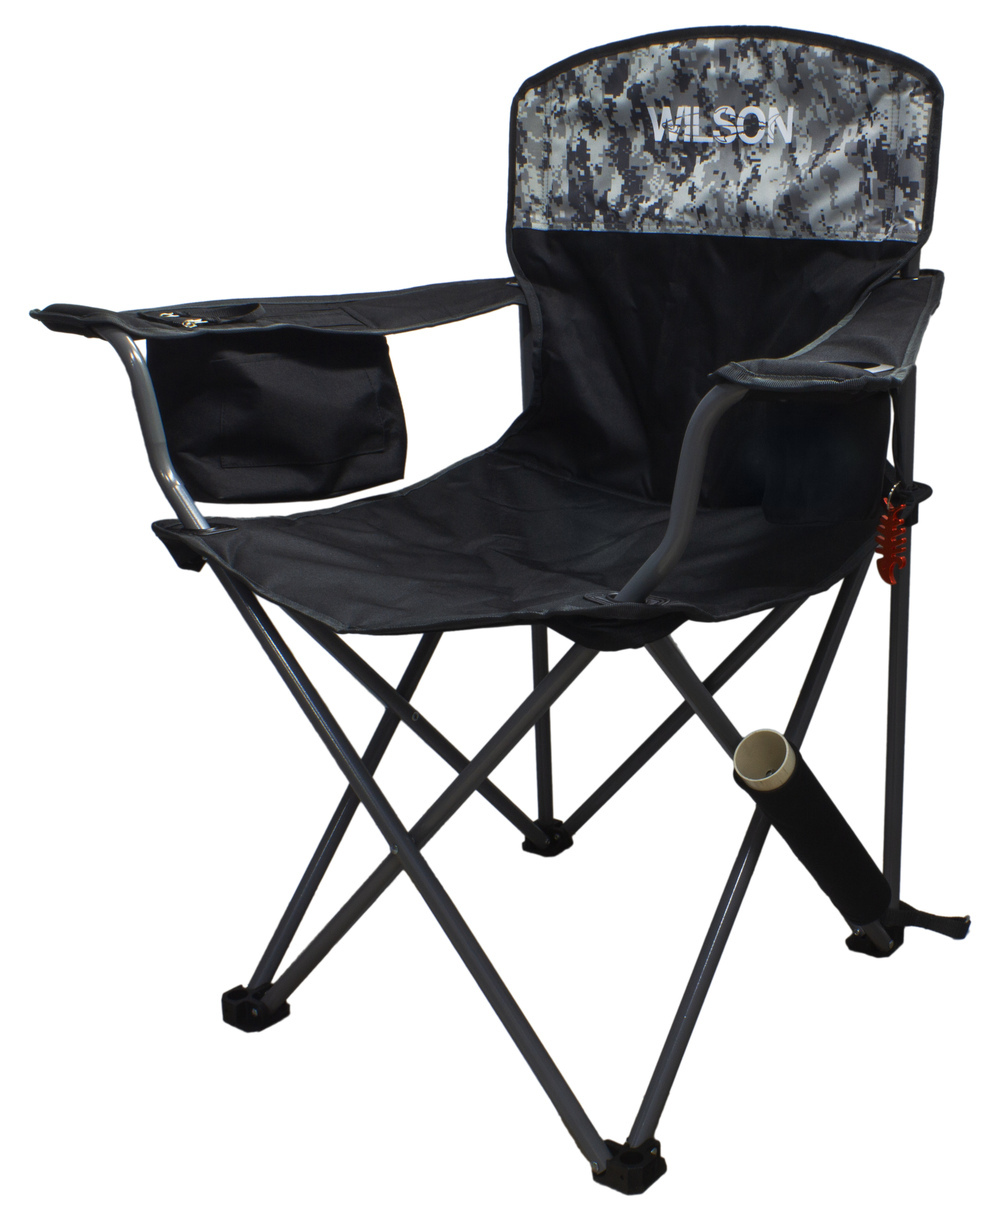 Fishing Chair with Rod Holder – Built in Cooler – Hands Free Fishing Pole Holder - Storage Pouch – Storage Bag for Fishing Accessories – Full Size